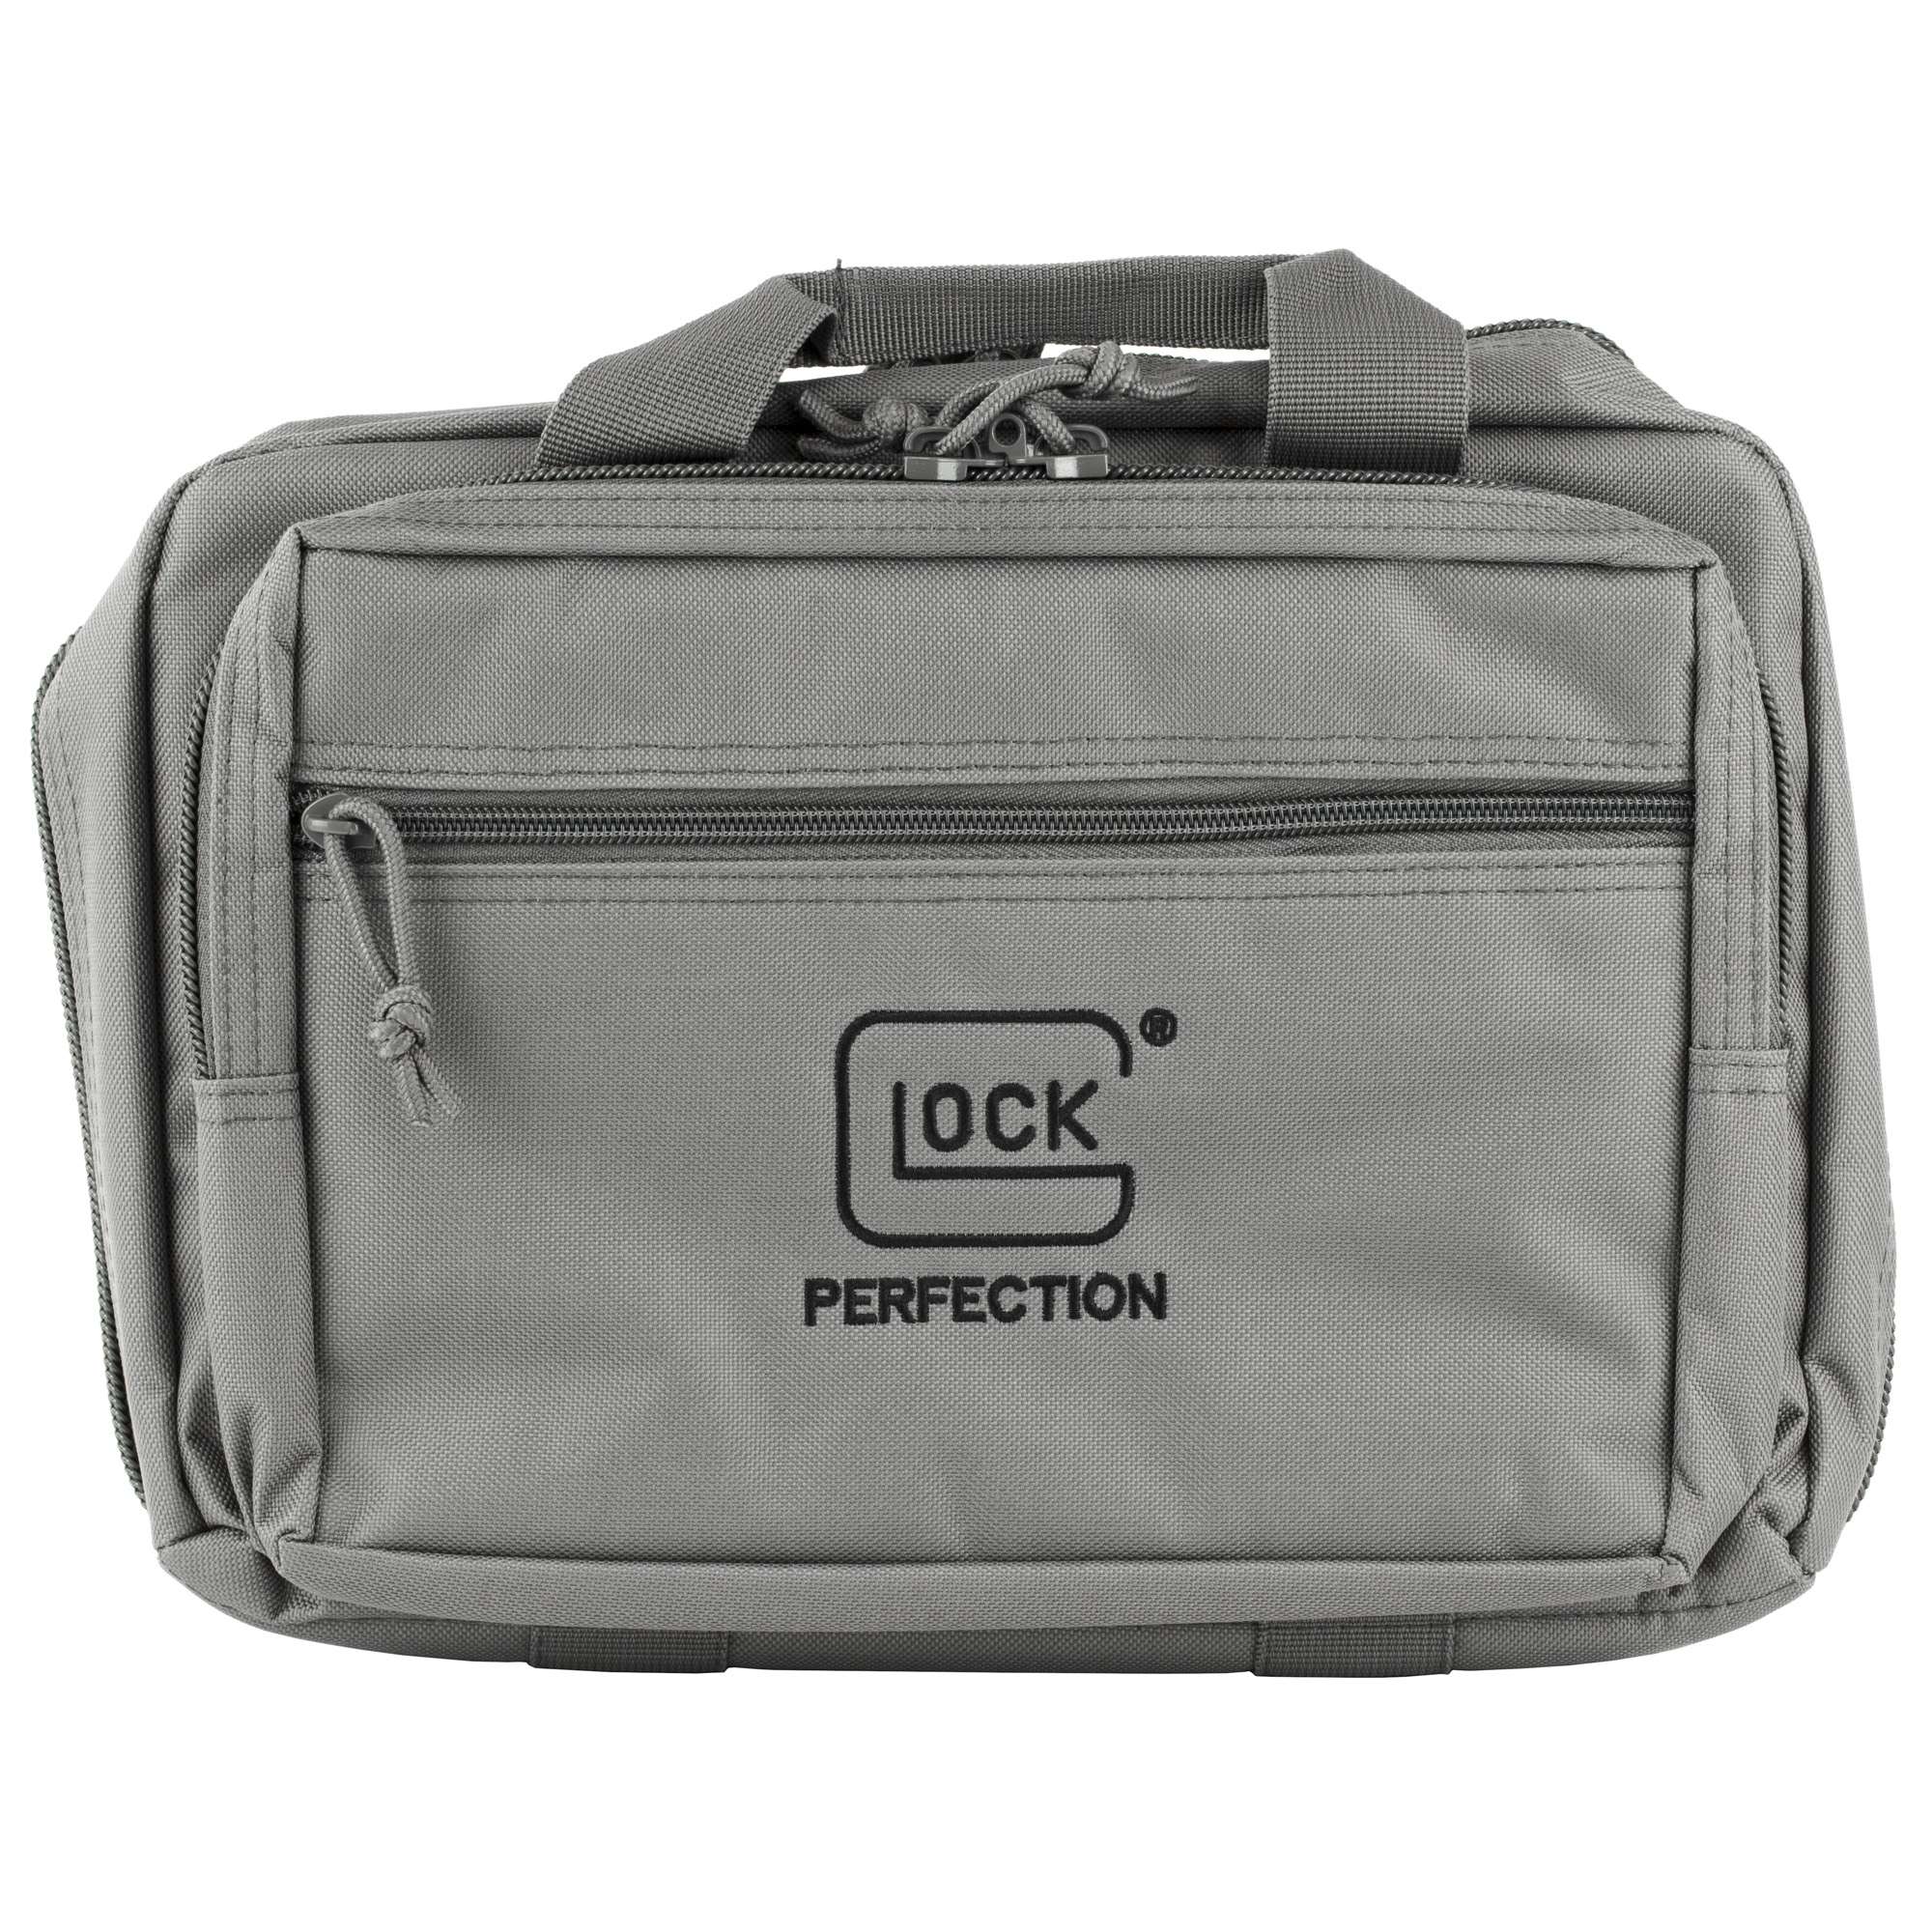 Glock Double Pistol Case with Gray Finish, 5 Internal Mag Holders & Carry Handle (AP60301)